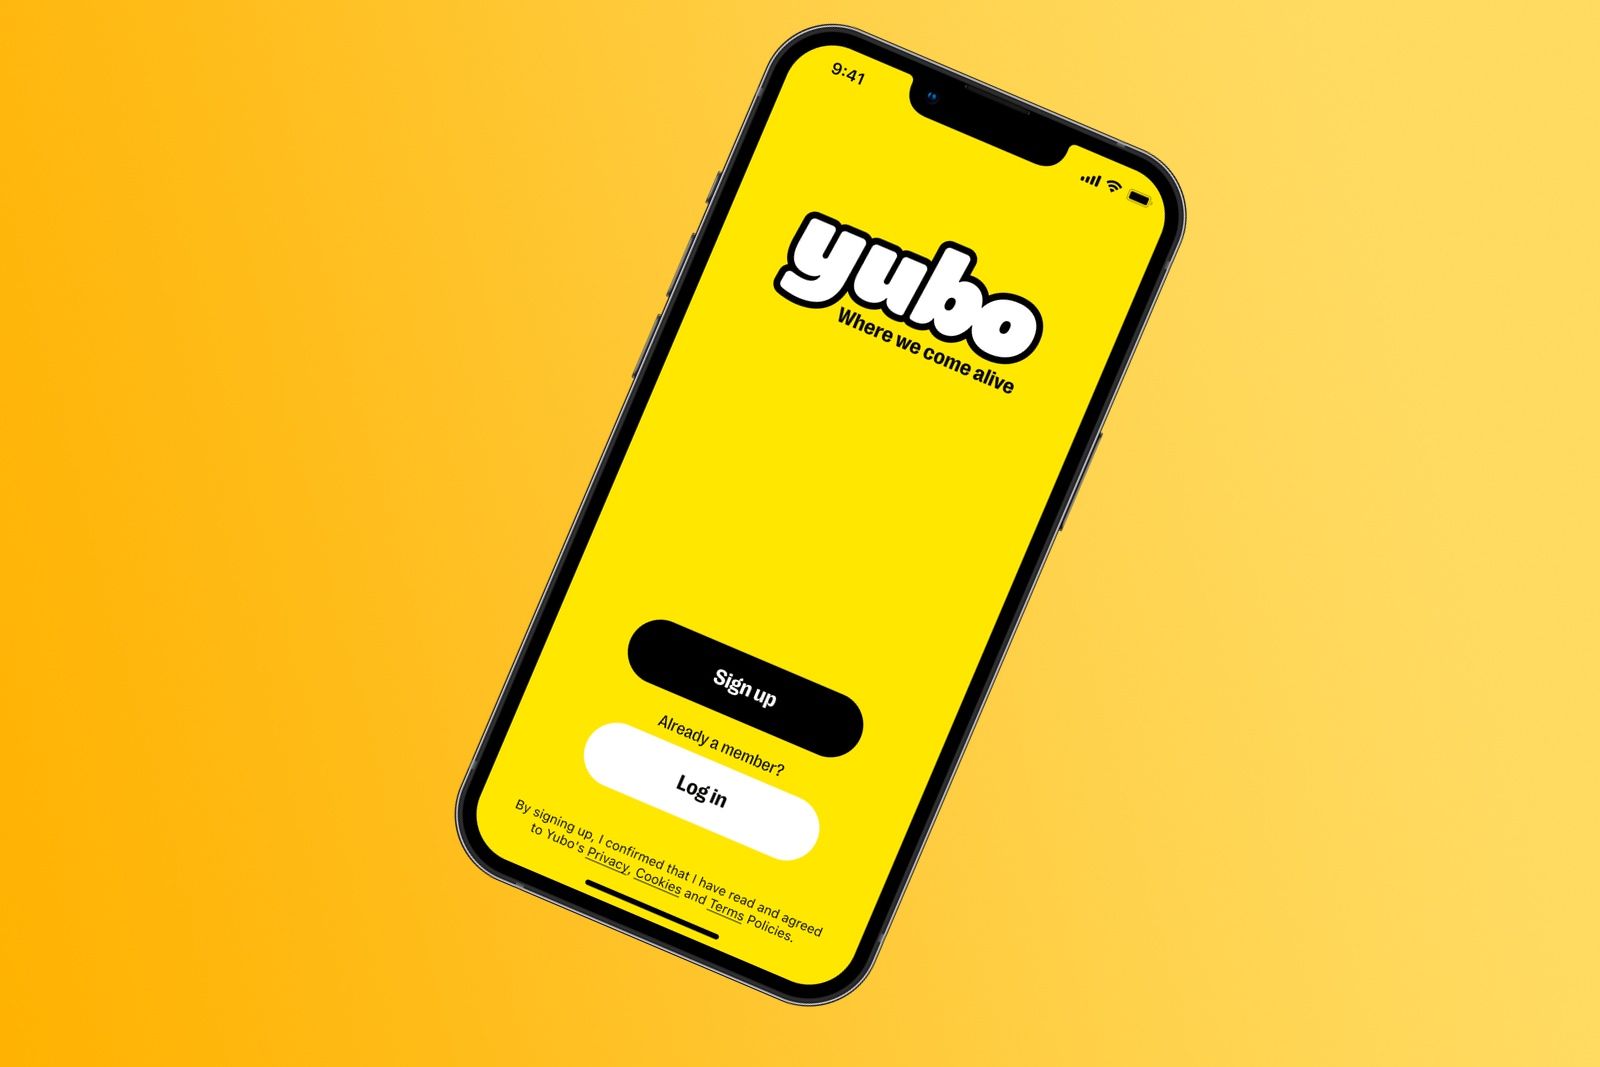 Yubo rolls out innovative age verification to 100% of users photo 2